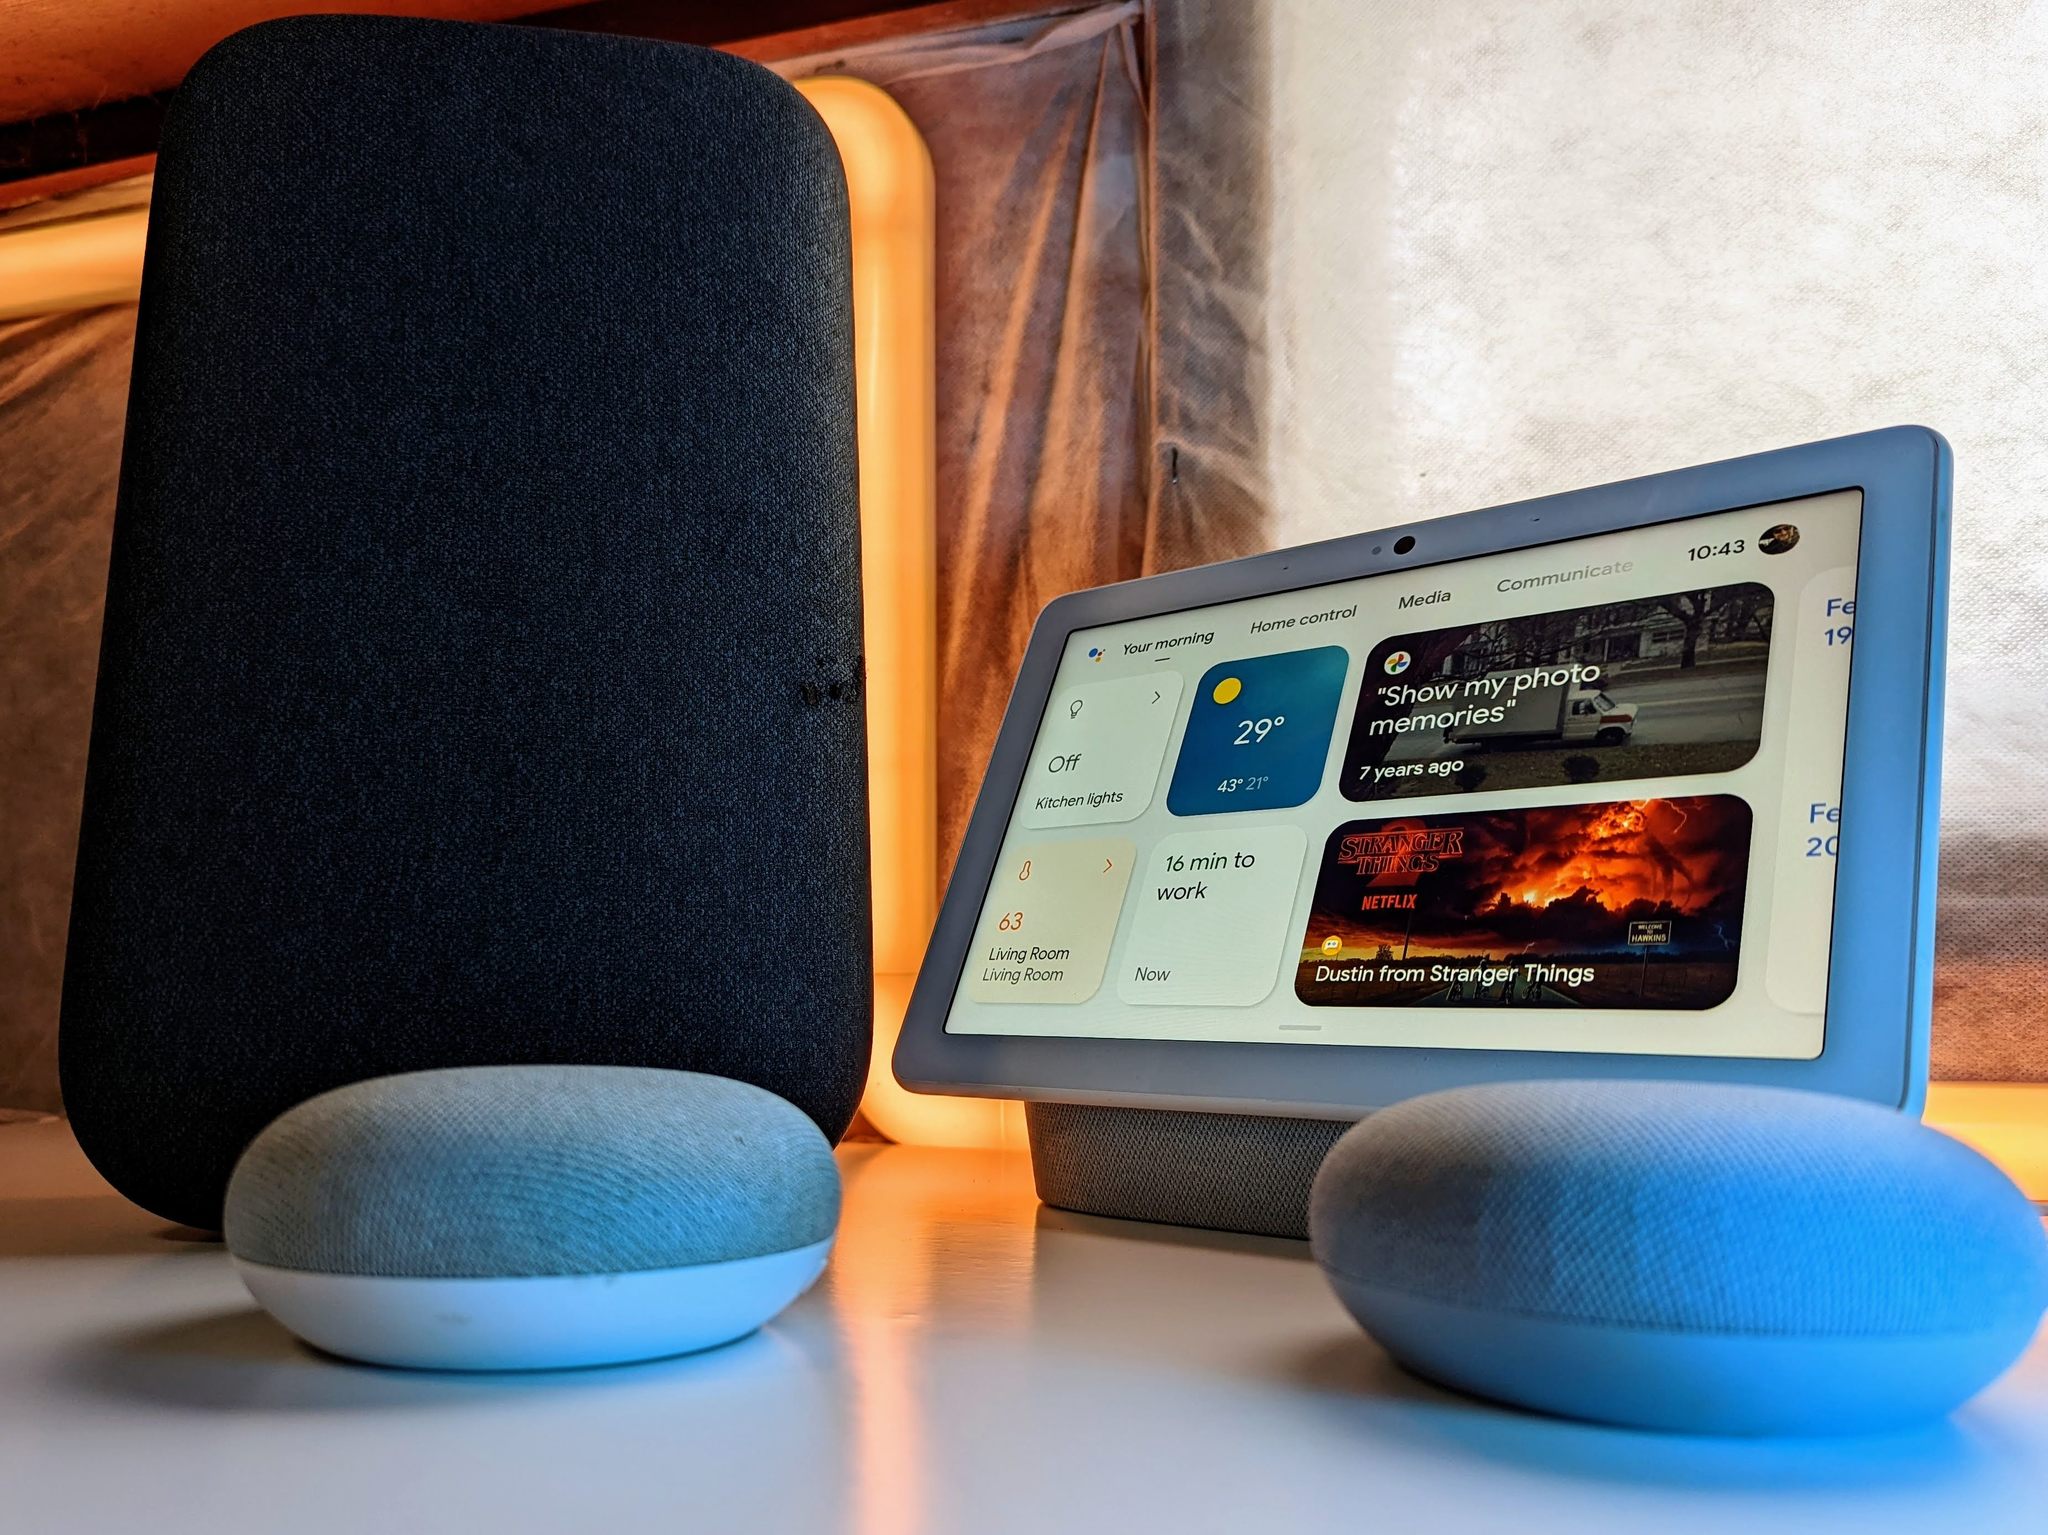 How to factory reset Google Assistant or Nest speakers